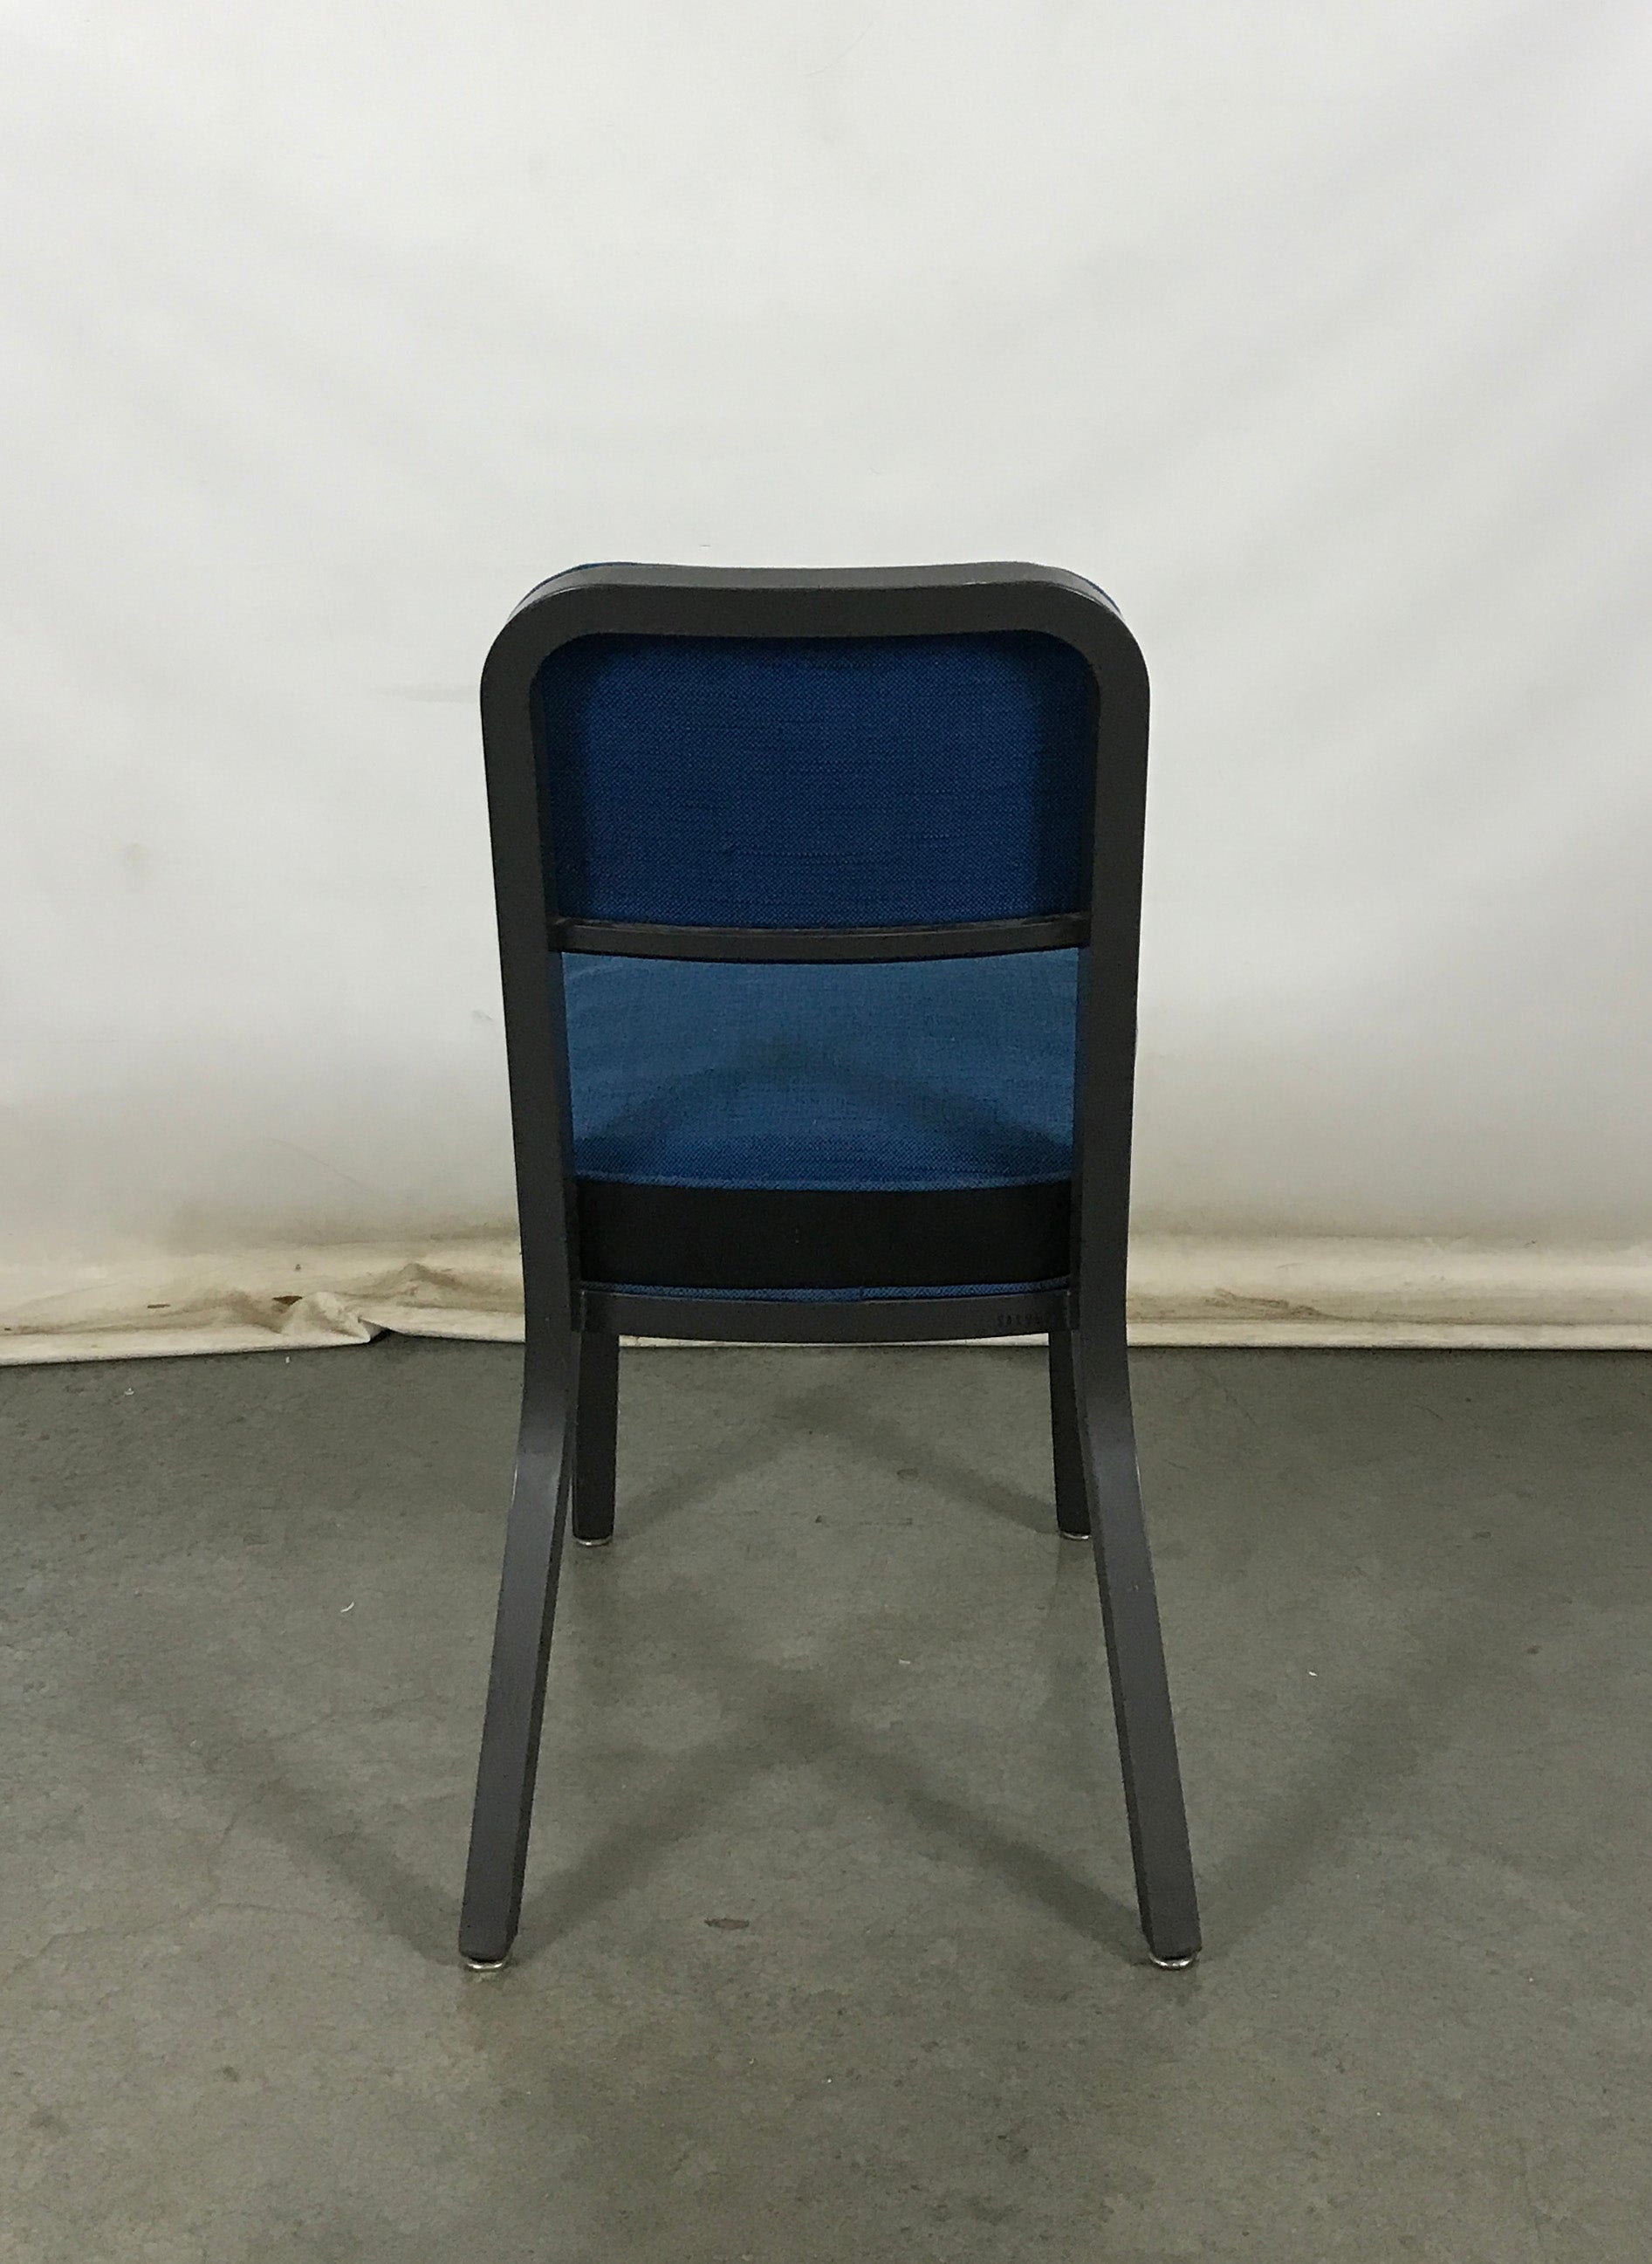 Steelcase Blue and Black Chair